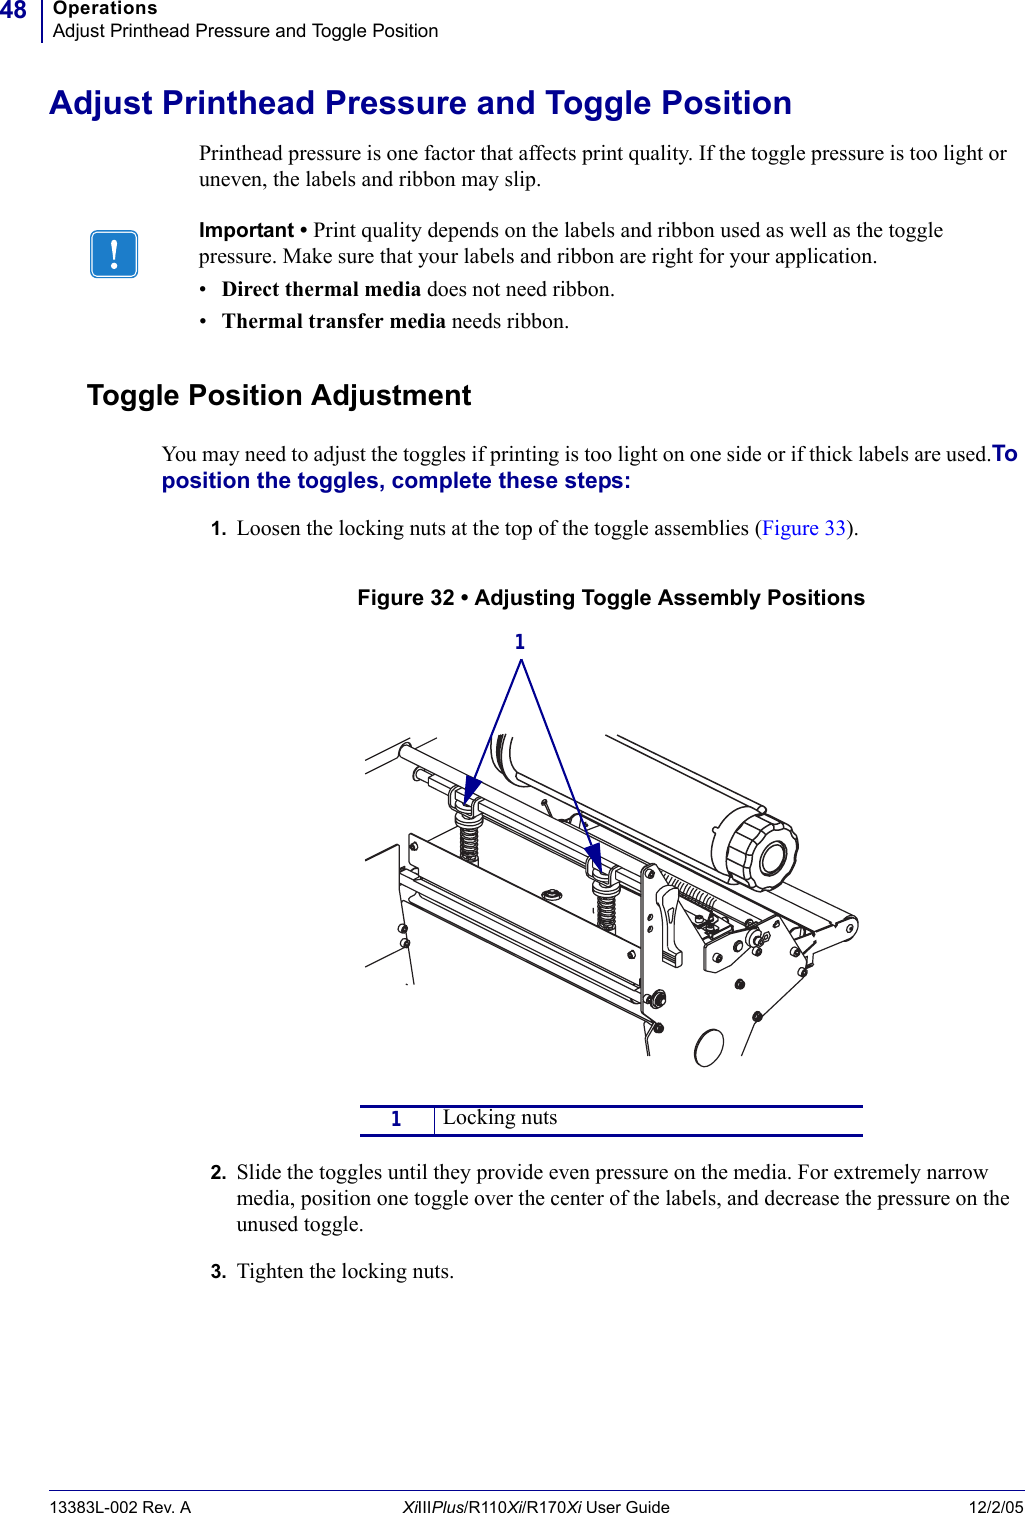 OperationsAdjust Printhead Pressure and Toggle Position4813383L-002 Rev. A XiIIIPlus/R110Xi/R170Xi User Guide 12/2/05Adjust Printhead Pressure and Toggle PositionPrinthead pressure is one factor that affects print quality. If the toggle pressure is too light or uneven, the labels and ribbon may slip.Toggle Position AdjustmentYou may need to adjust the toggles if printing is too light on one side or if thick labels are used.To position the toggles, complete these steps:1. Loosen the locking nuts at the top of the toggle assemblies (Figure 33).Figure 32 • Adjusting Toggle Assembly Positions2. Slide the toggles until they provide even pressure on the media. For extremely narrow media, position one toggle over the center of the labels, and decrease the pressure on the unused toggle.3. Tighten the locking nuts.Important • Print quality depends on the labels and ribbon used as well as the toggle pressure. Make sure that your labels and ribbon are right for your application. •Direct thermal media does not need ribbon.•Thermal transfer media needs ribbon.1Locking nuts1 